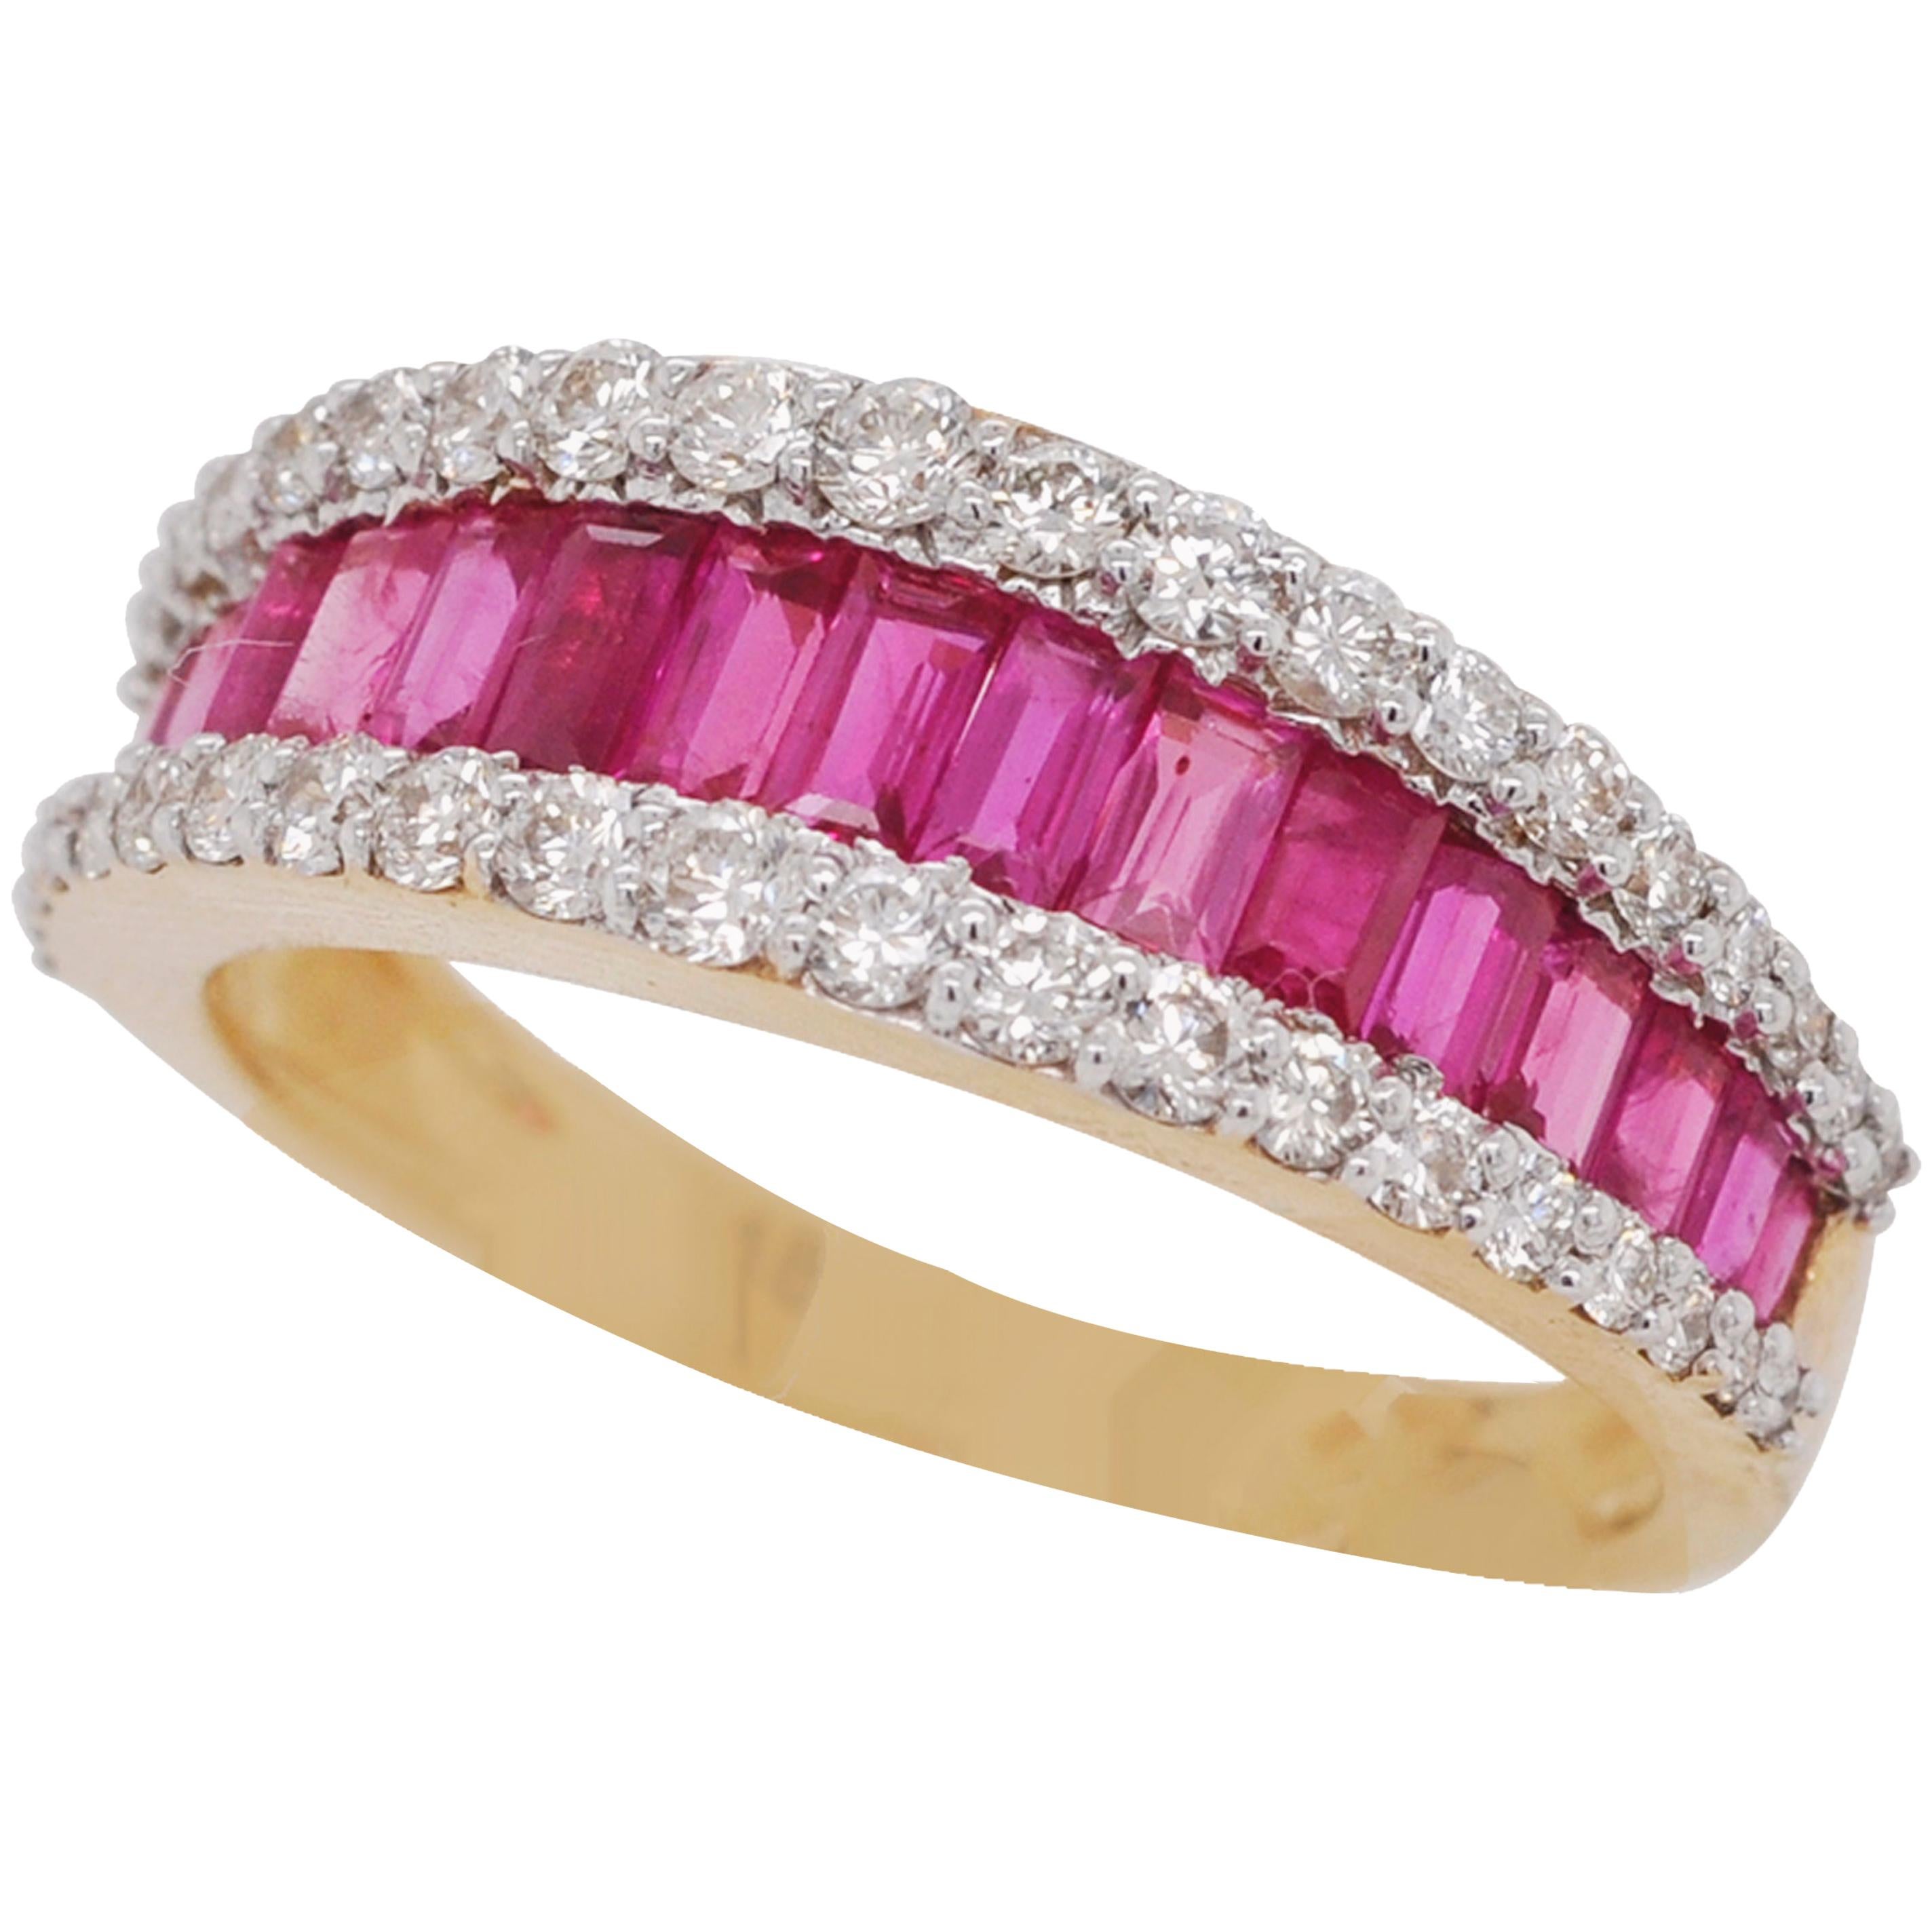 18 Karat Gold Channel Set Ruby Baguette Diamond Contemporary Wedding Band Ring For Sale